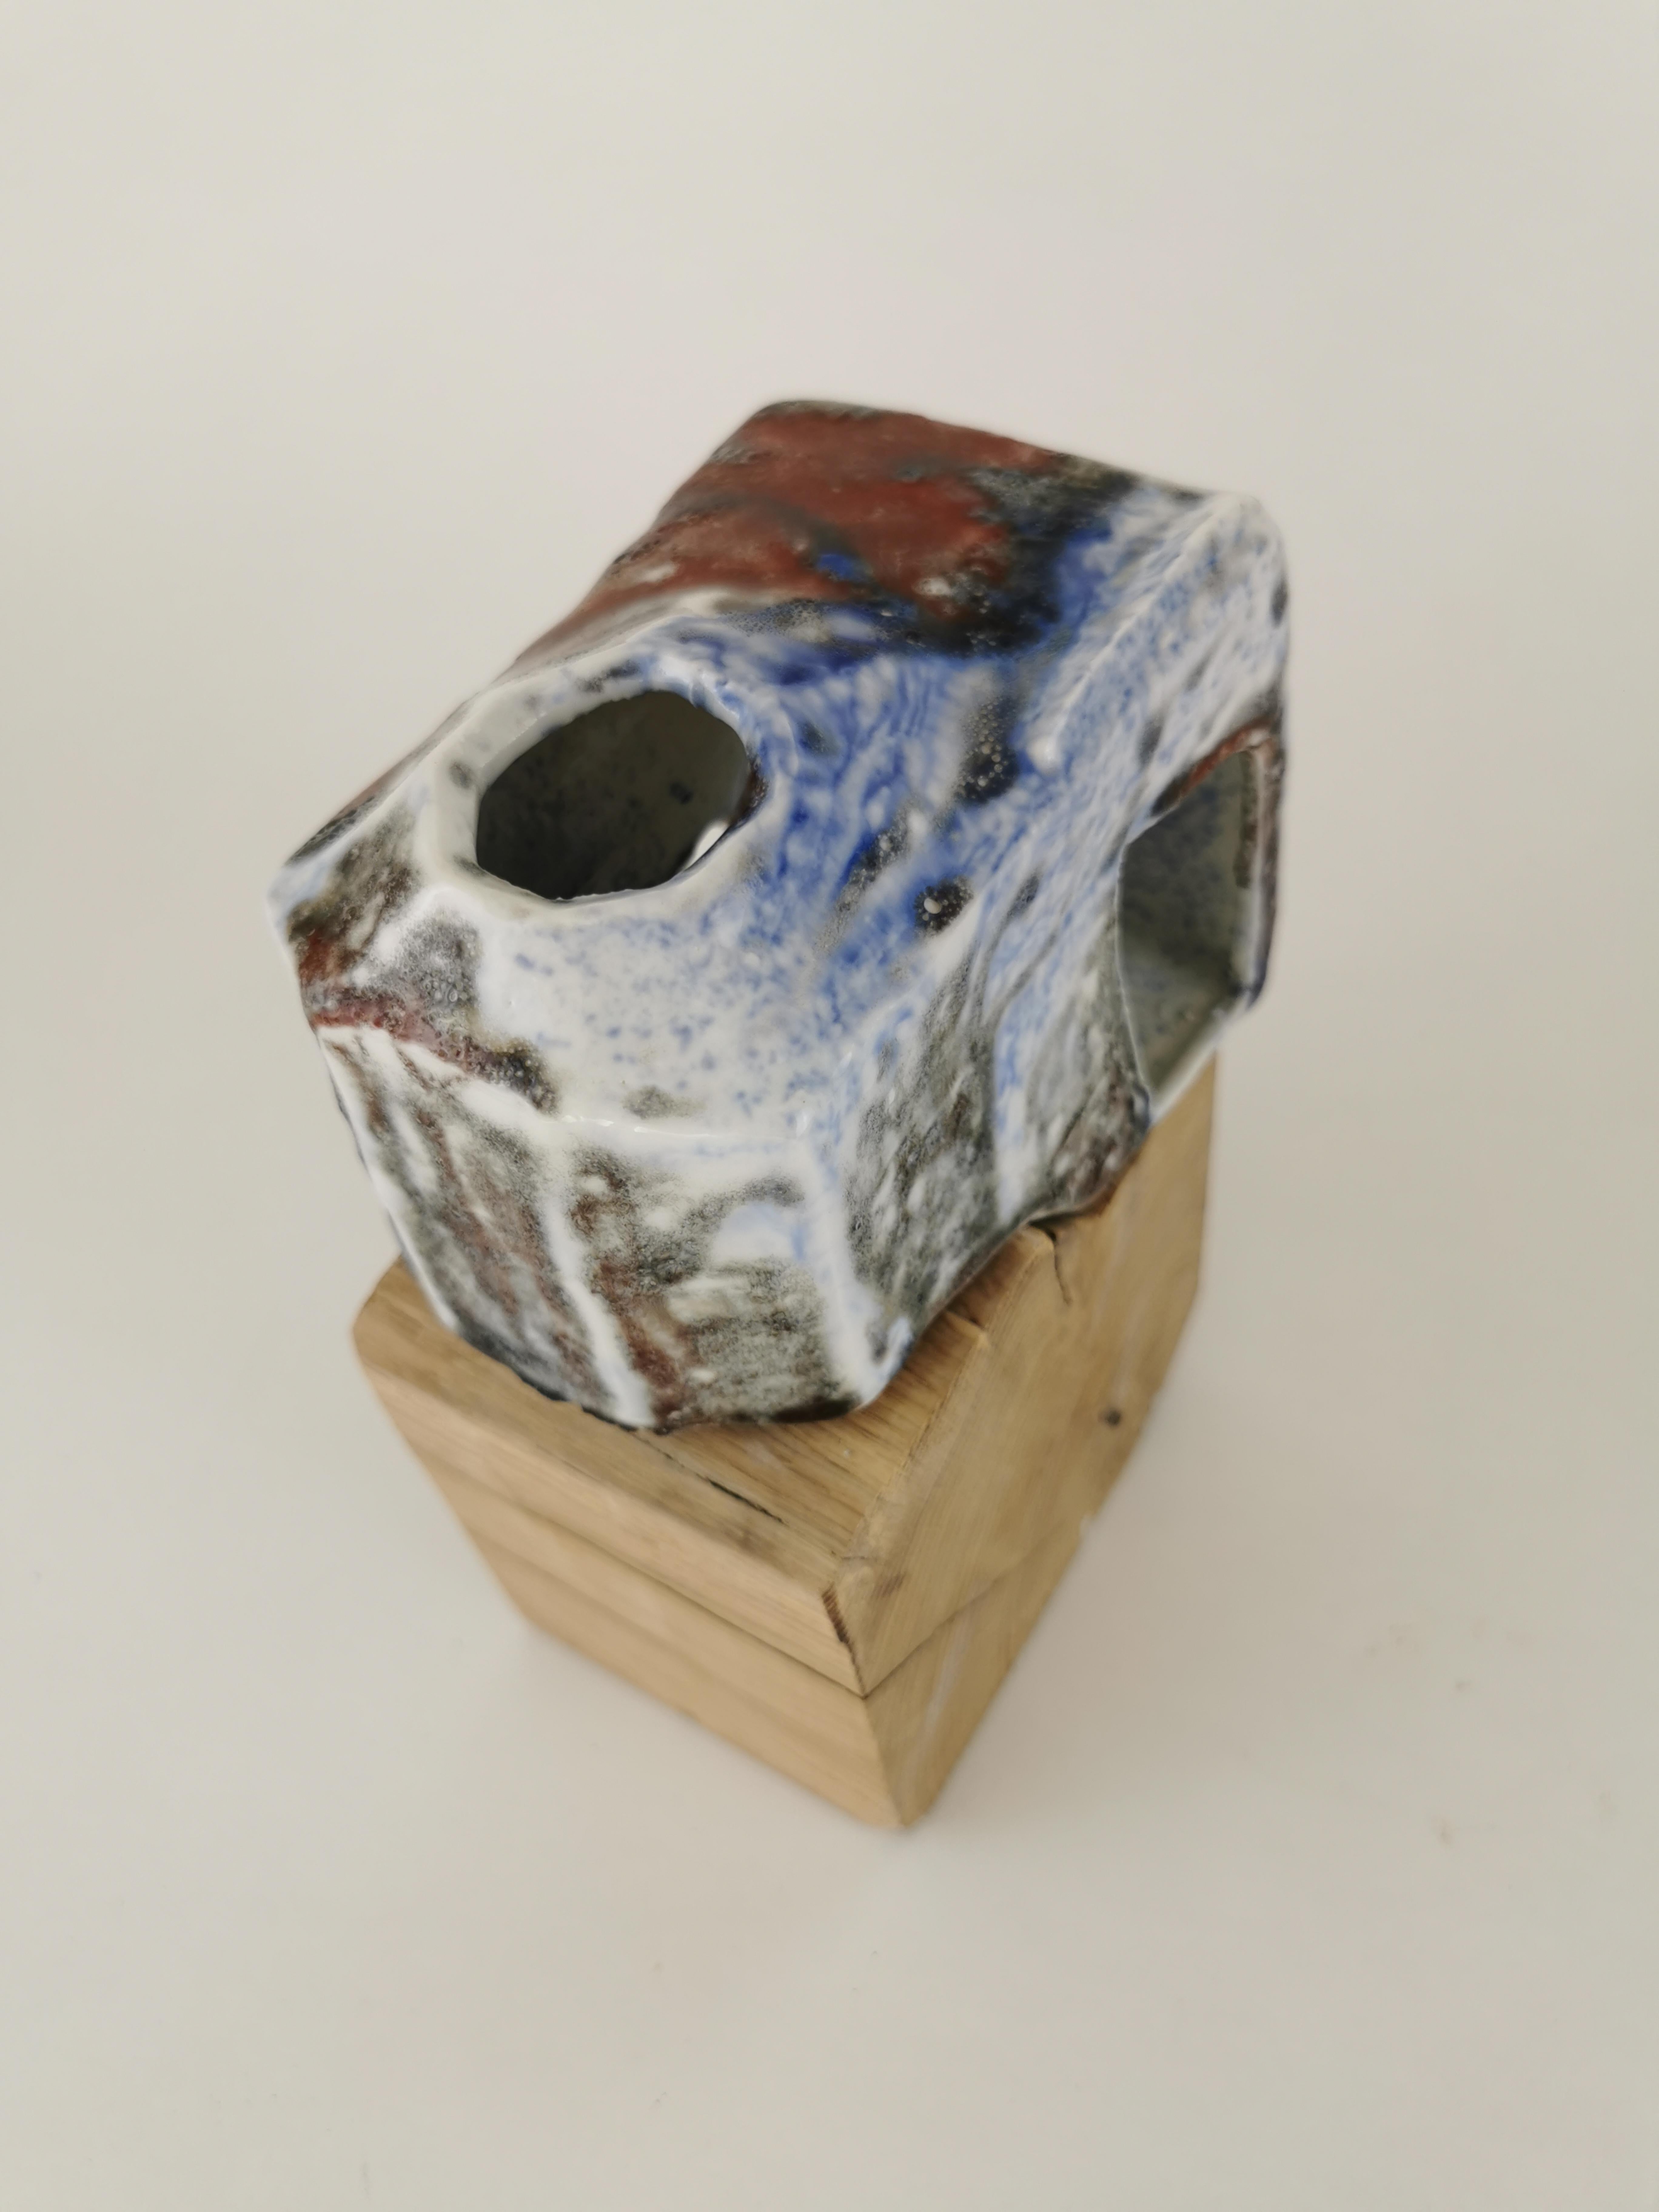 Shelter IV Decorative Object by Dora Stanczel
One of a Kind.
Dimensions: D 9 x W 14 x H 11 cm.
Materials: Porcelain, colored glaze and gold.

Dimensions are variable. A wooden stand can be included. Please contact us.

I create bespoke and luxurious